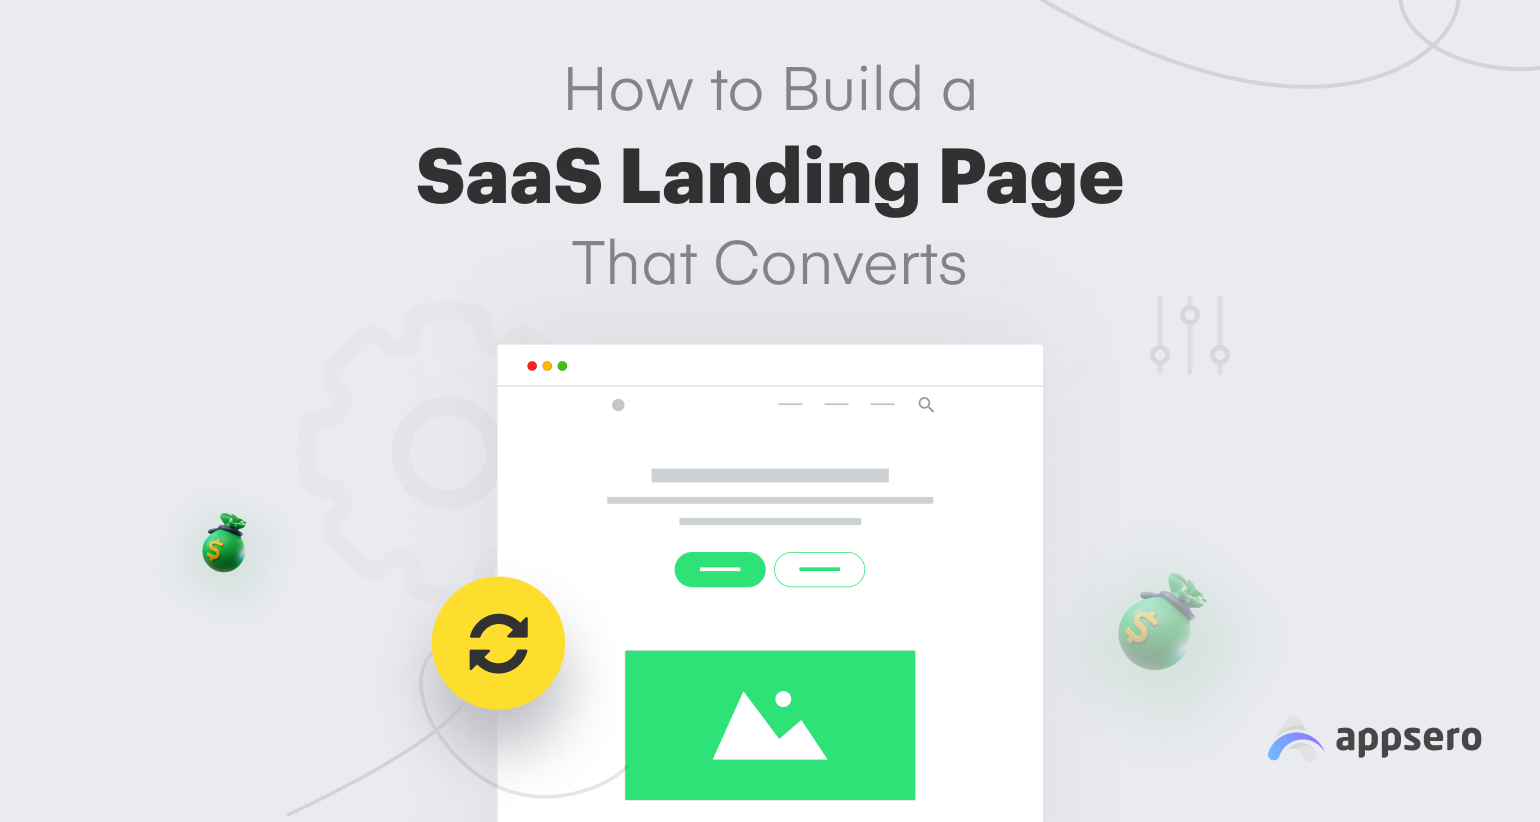 How to build a SaaS landing page that converts